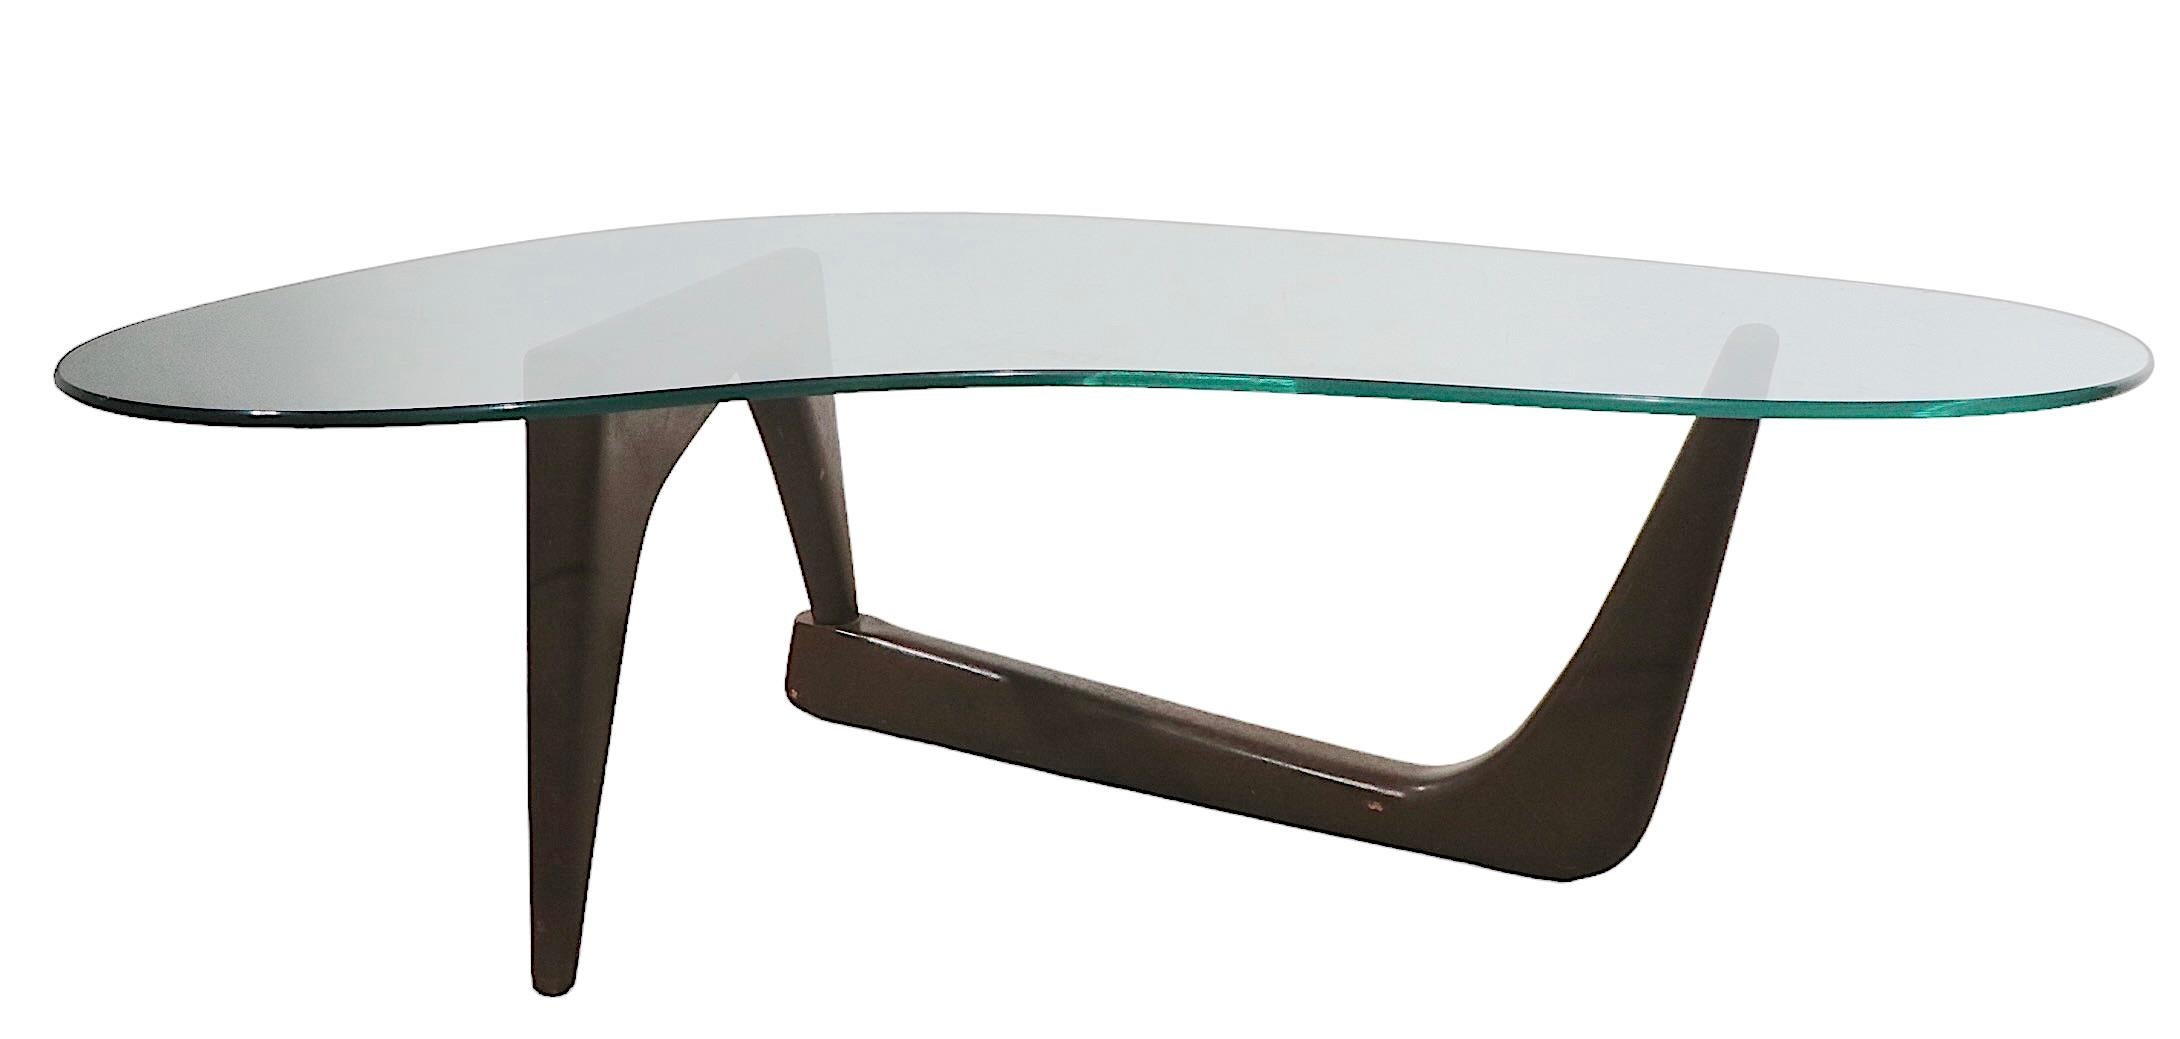 American Mid Century Amoeba Free Form Glass Top Coffee Table w Sculptural Wood Base For Sale